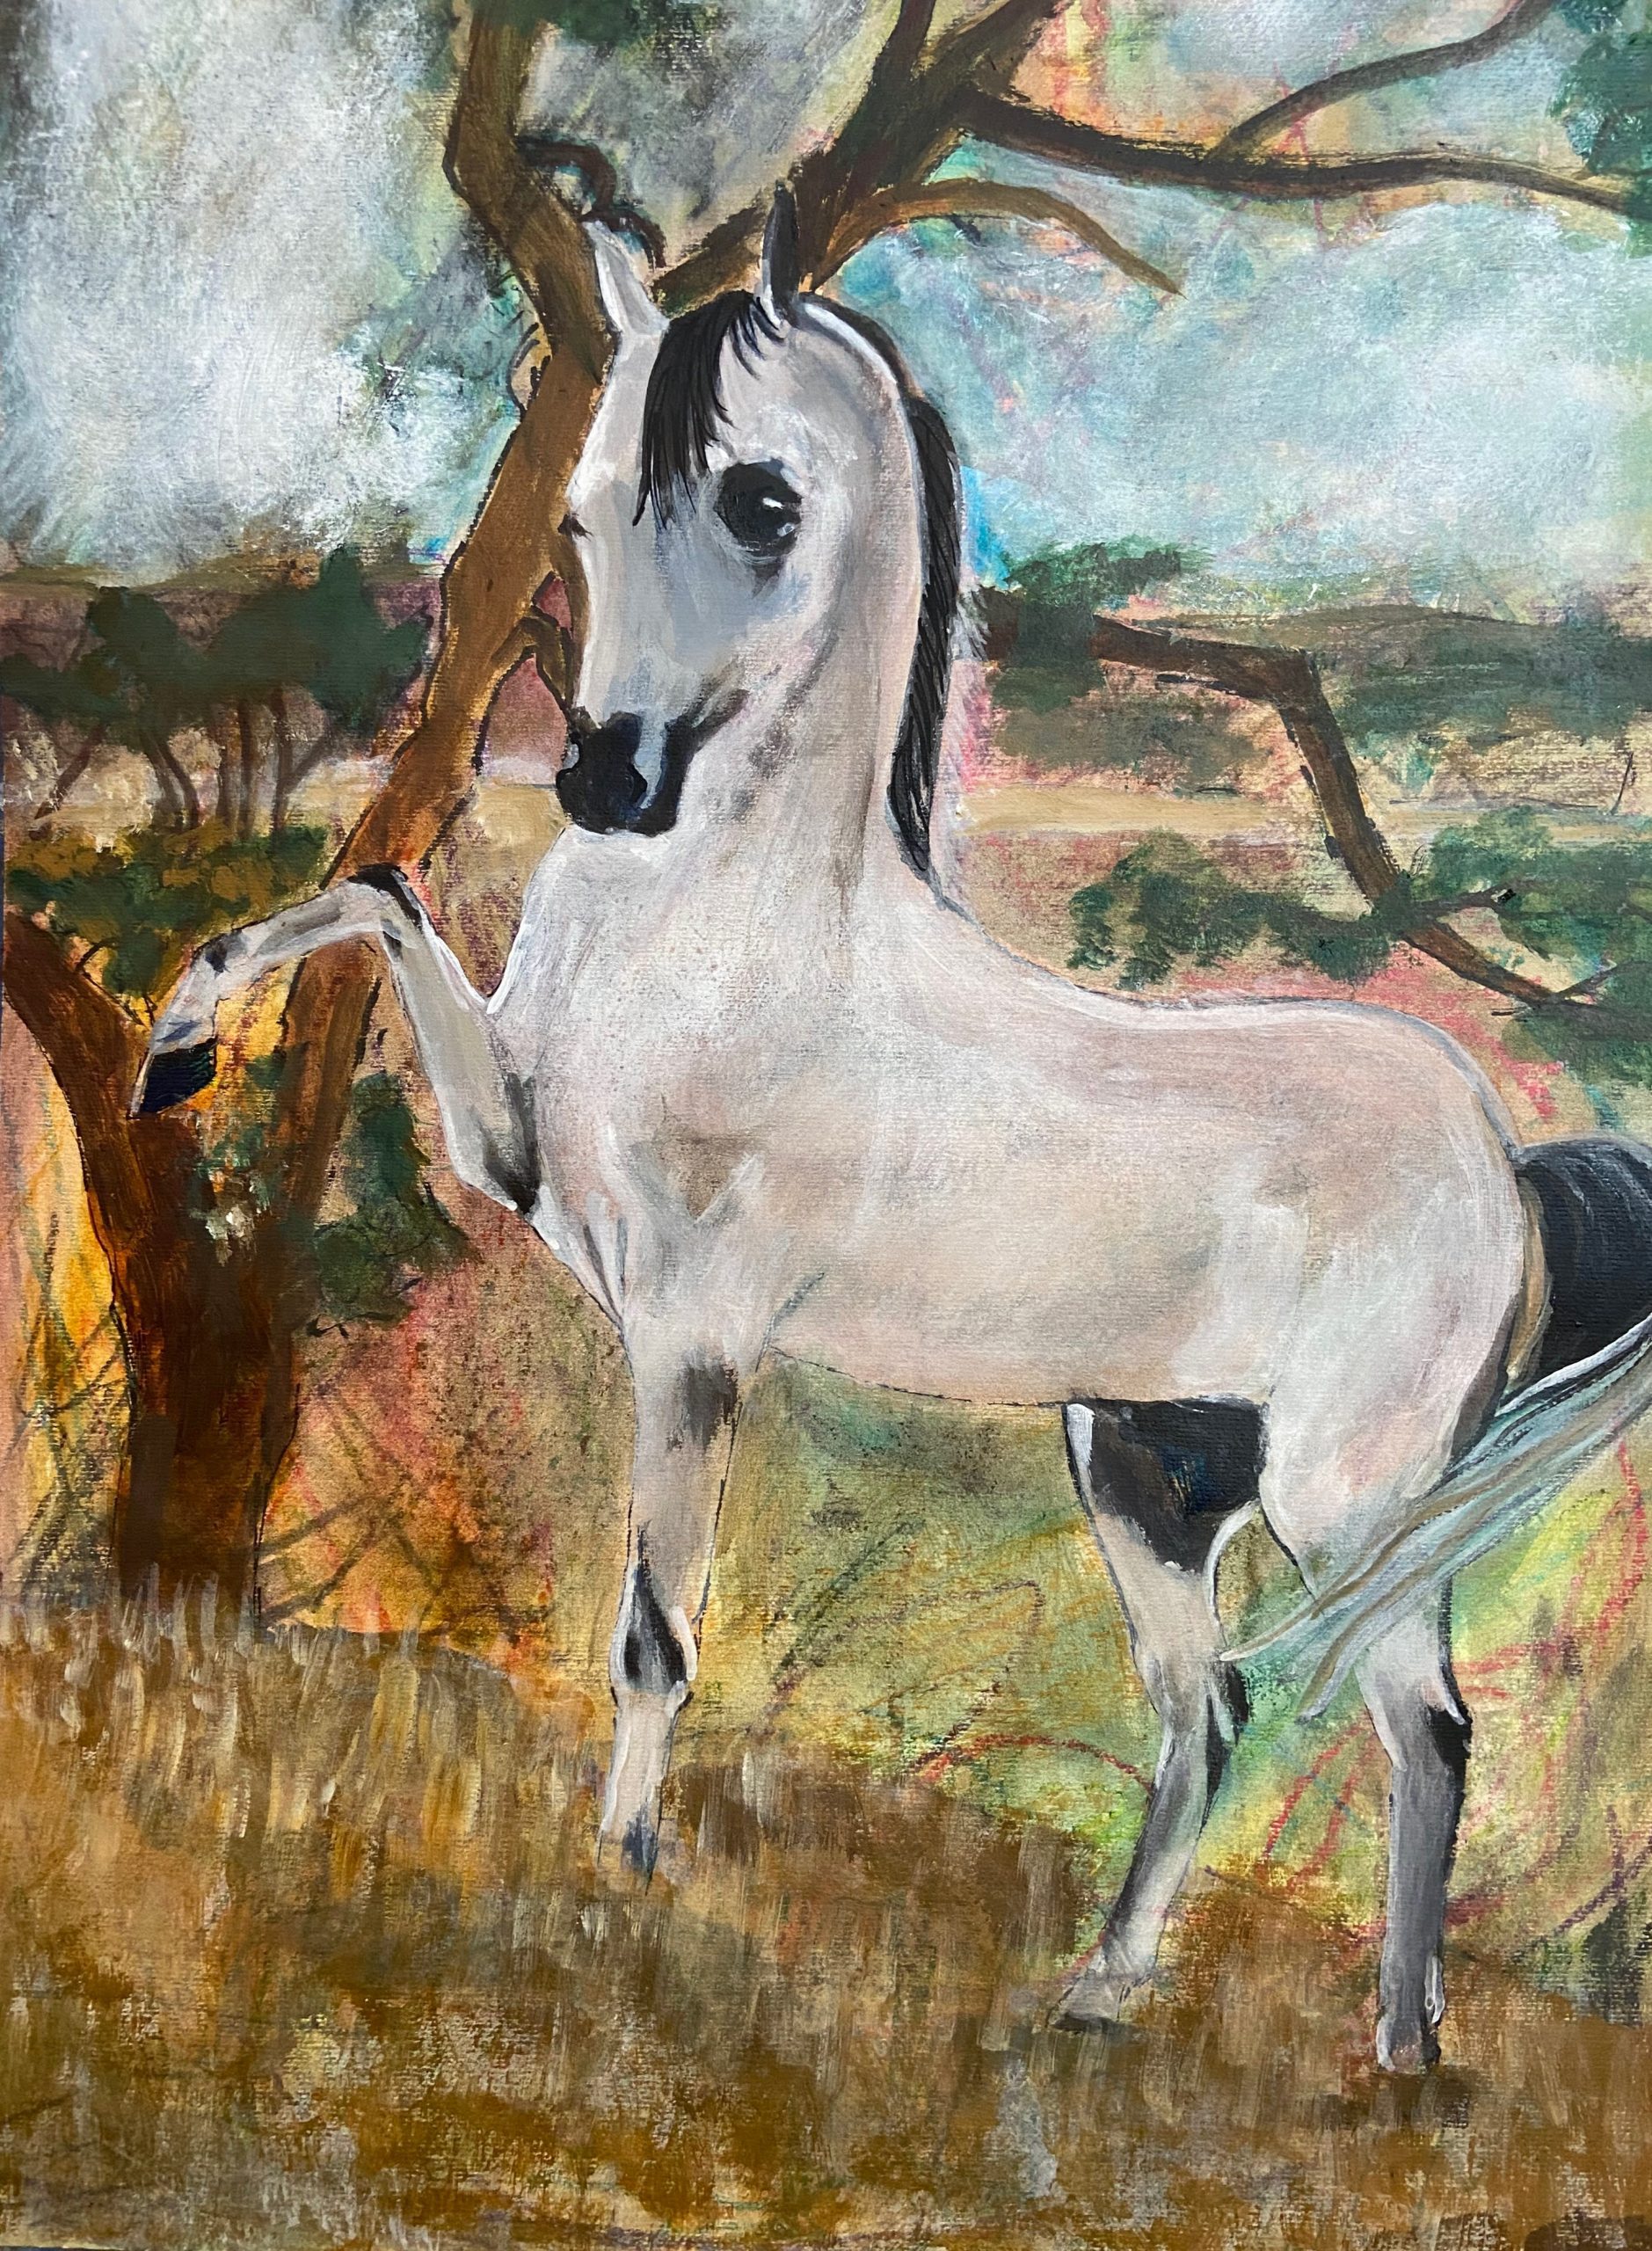 Final version of the painting of an Arabian horse